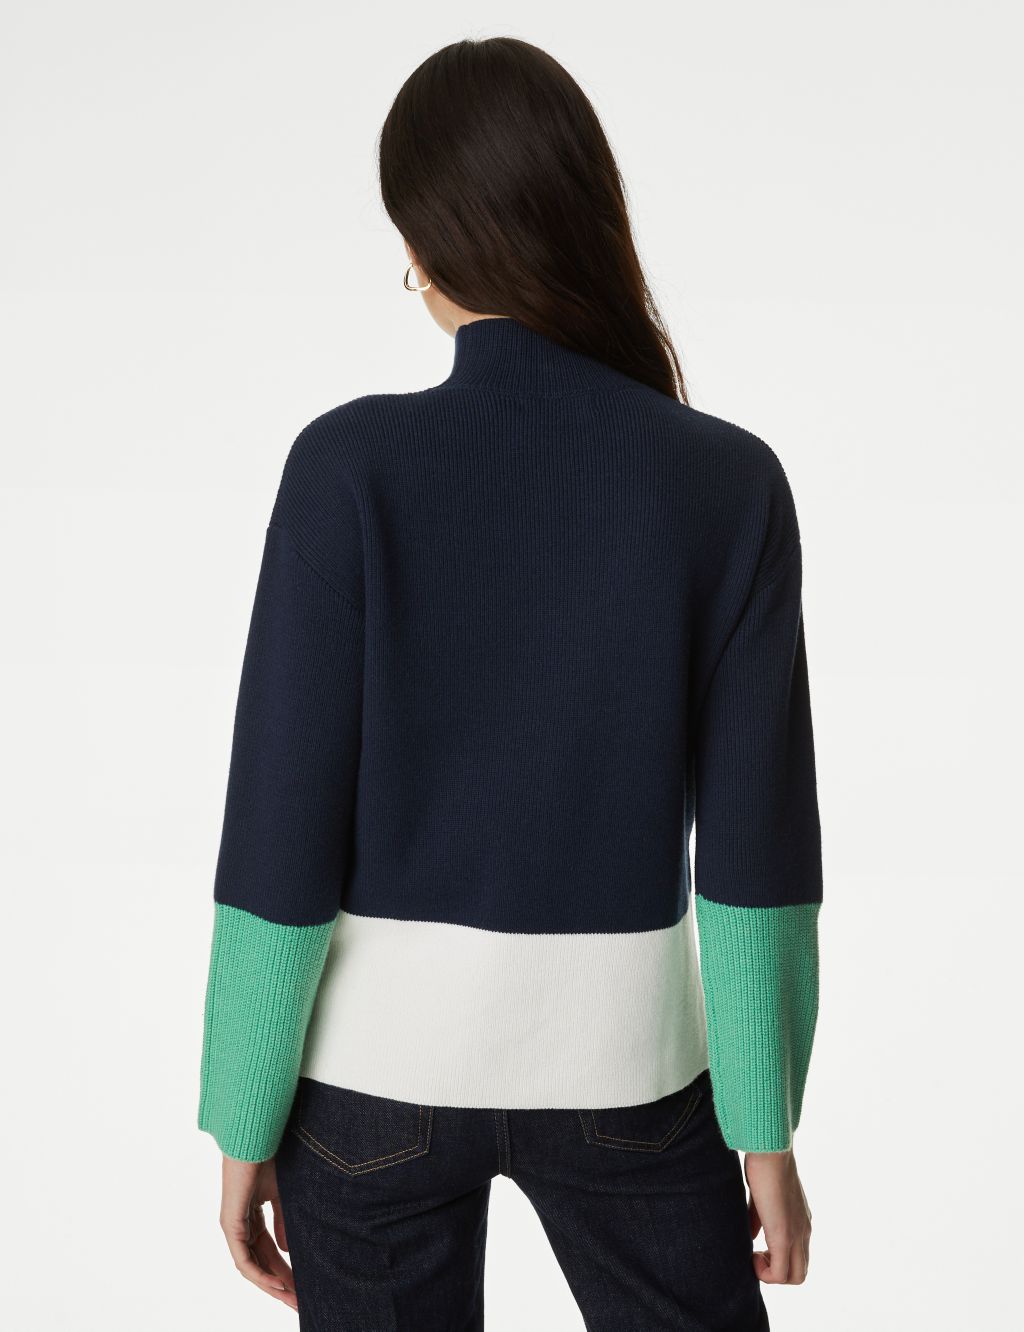 Cotton With Merino Wool Colour Block Jumper image 5